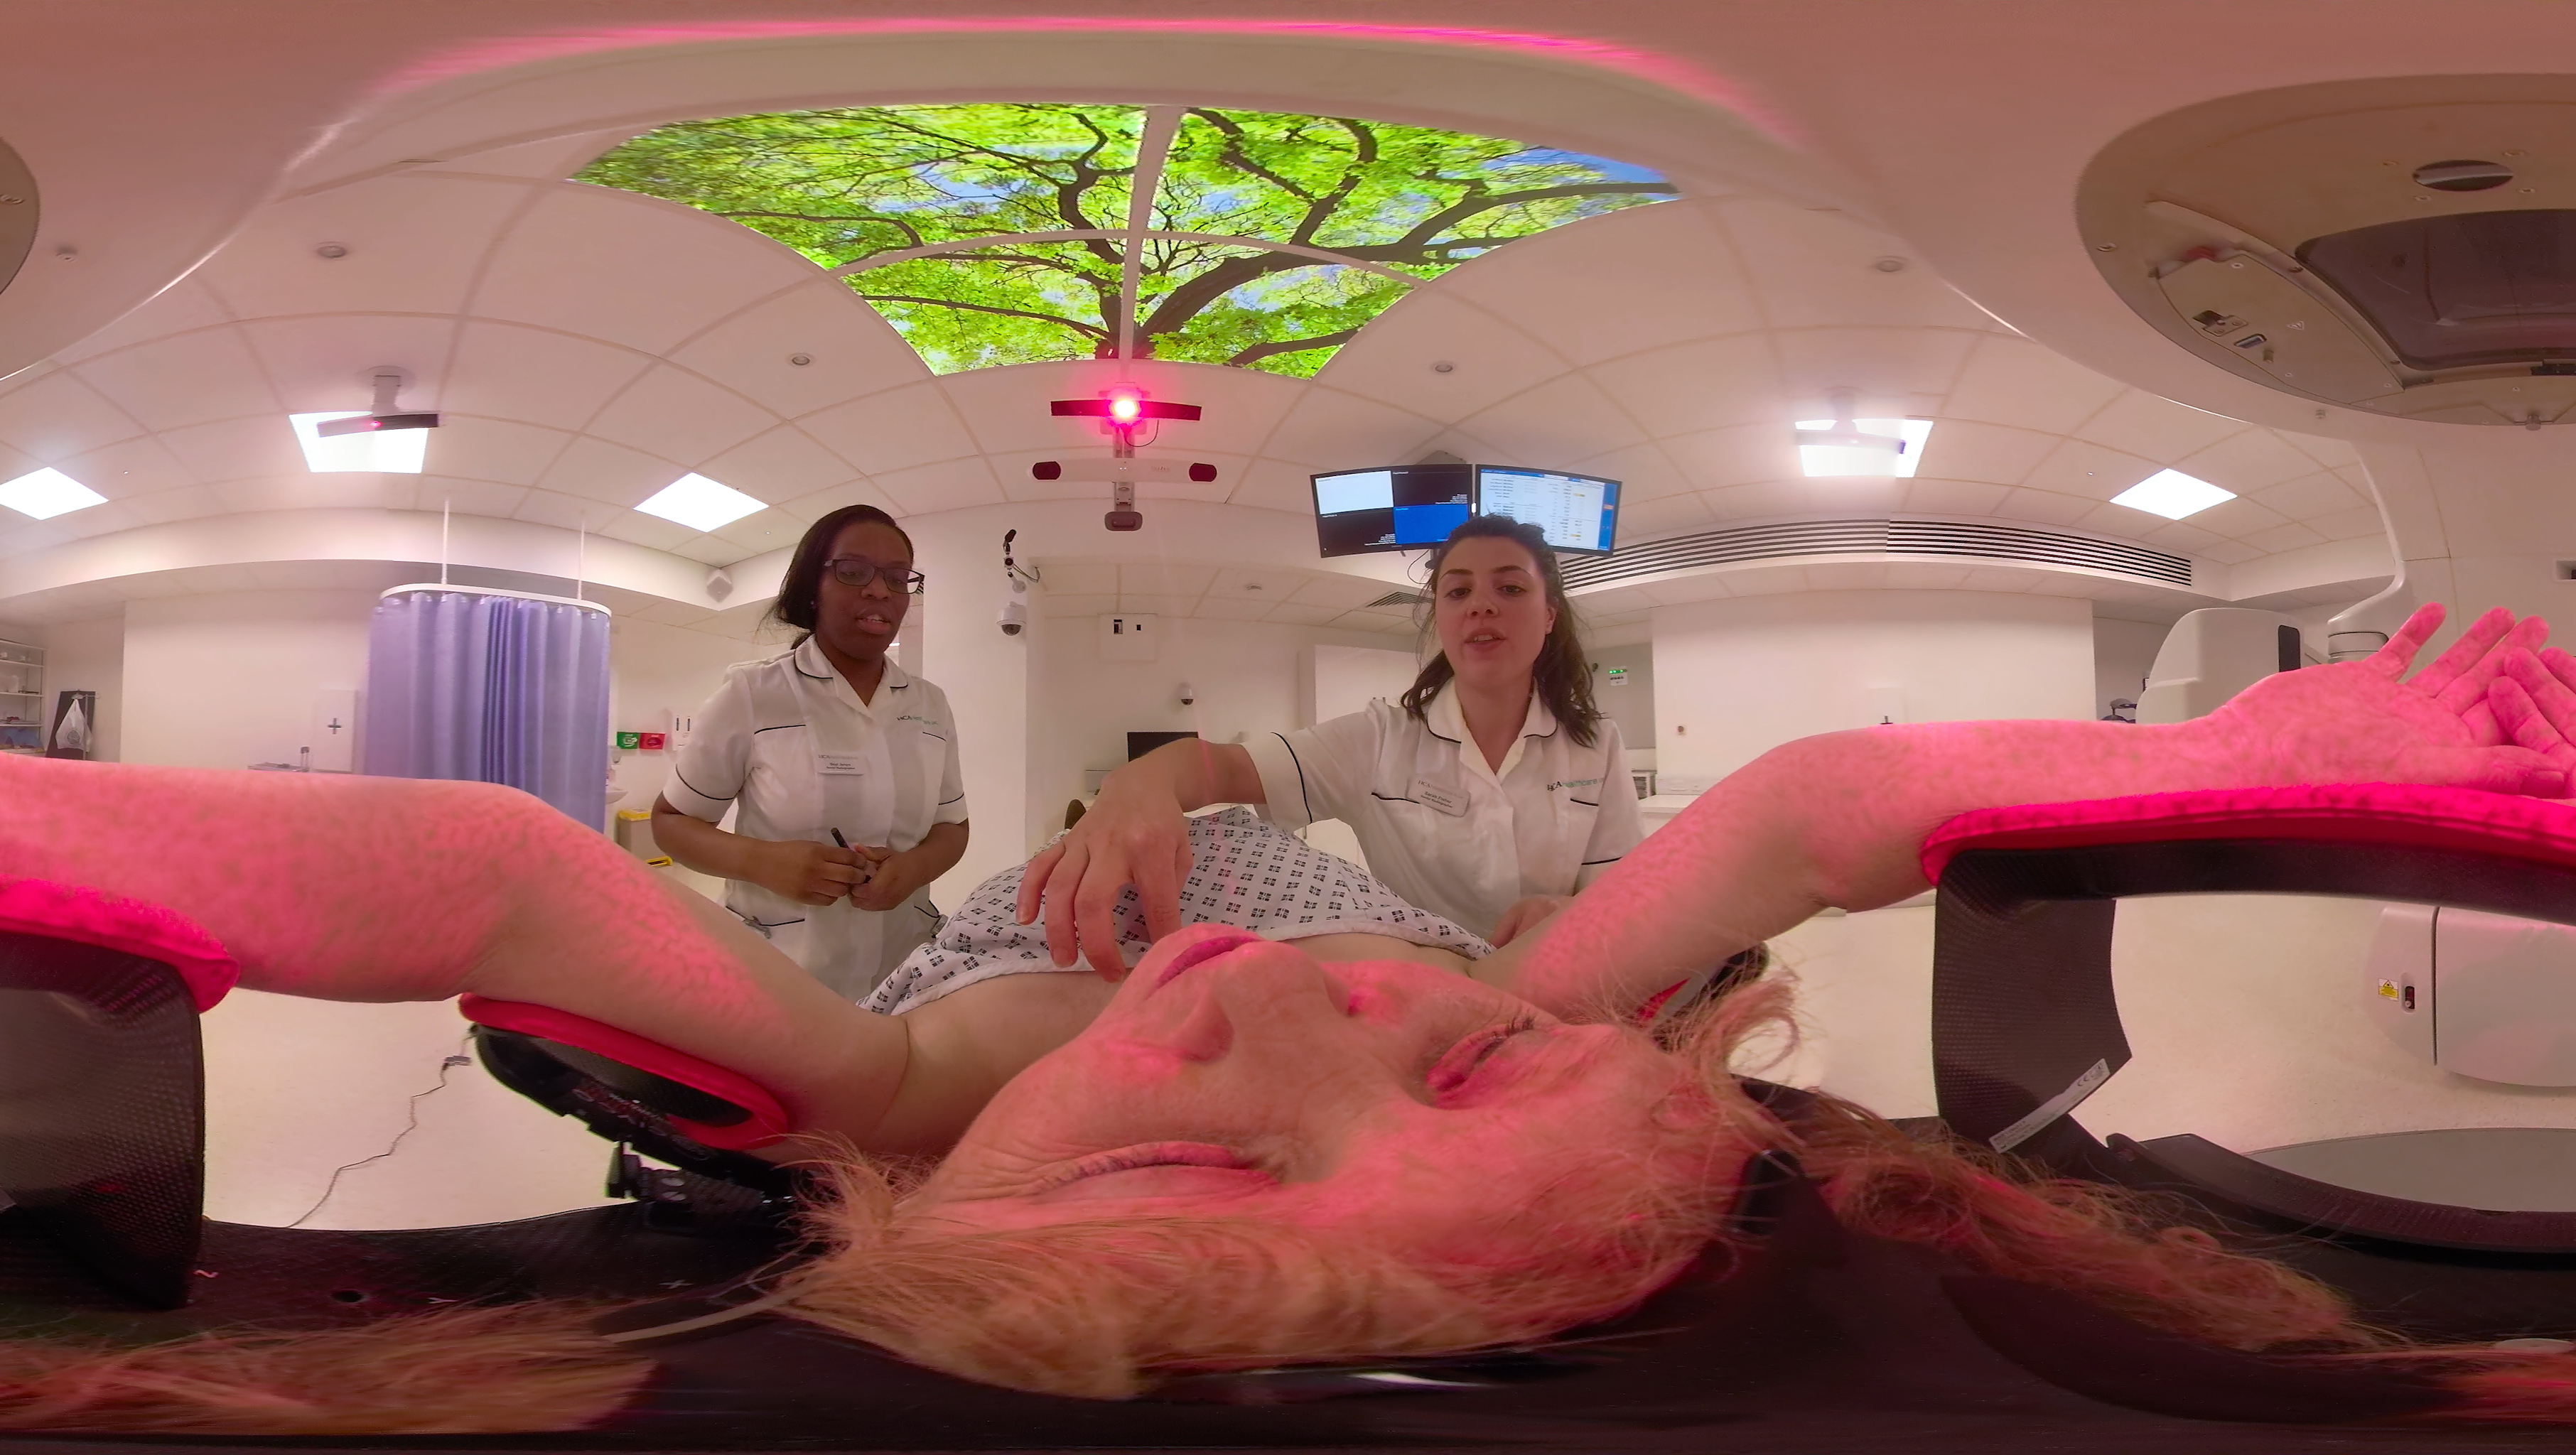 VR image of a patient having a CT scan, aided by two doctors